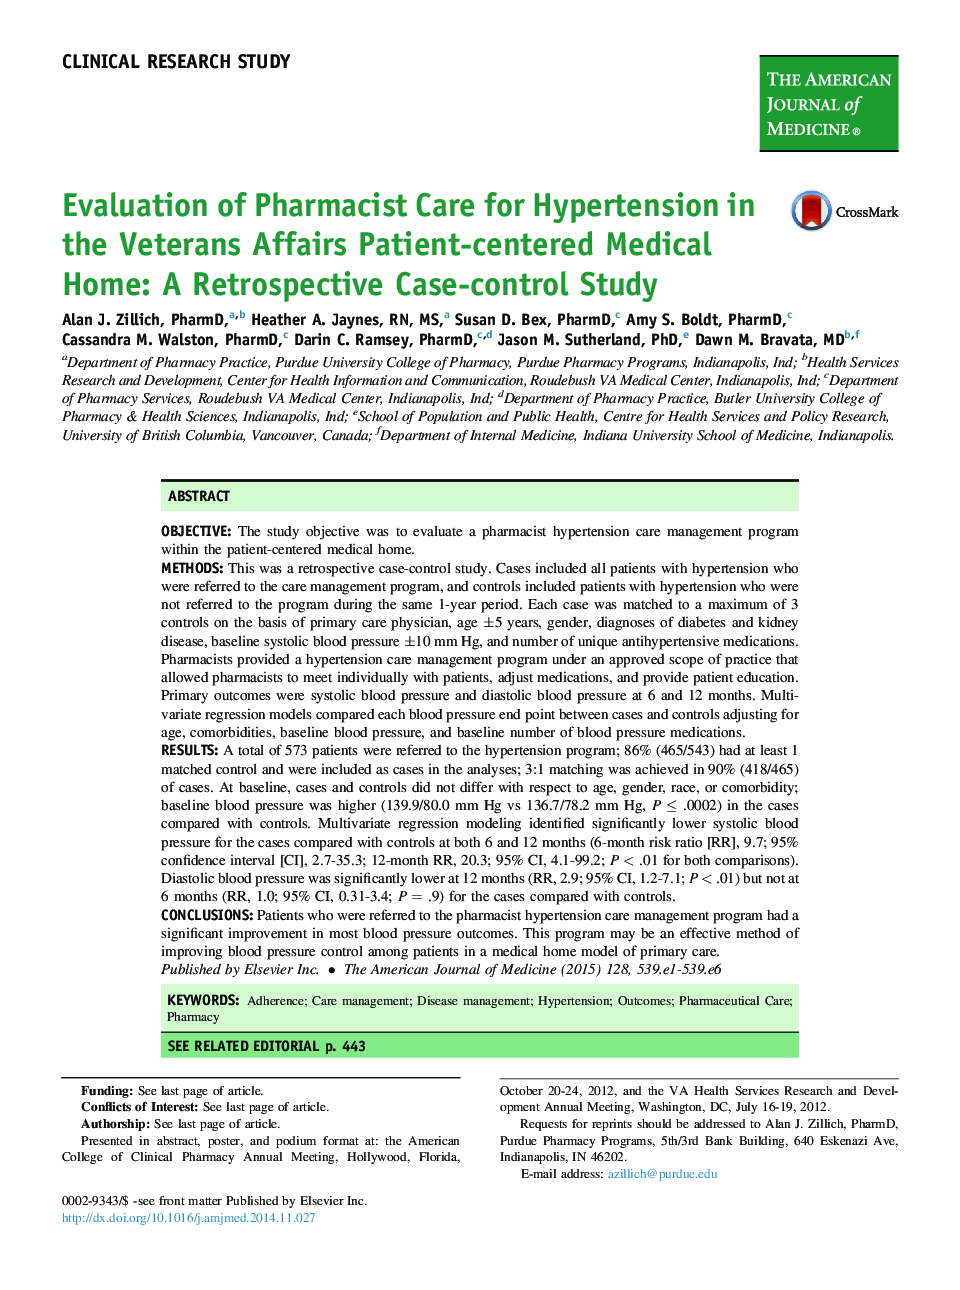 AJM onlineClinical research studyEvaluation of Pharmacist Care for Hypertension in the Veterans Affairs Patient-centered Medical Home: A Retrospective Case-control Study